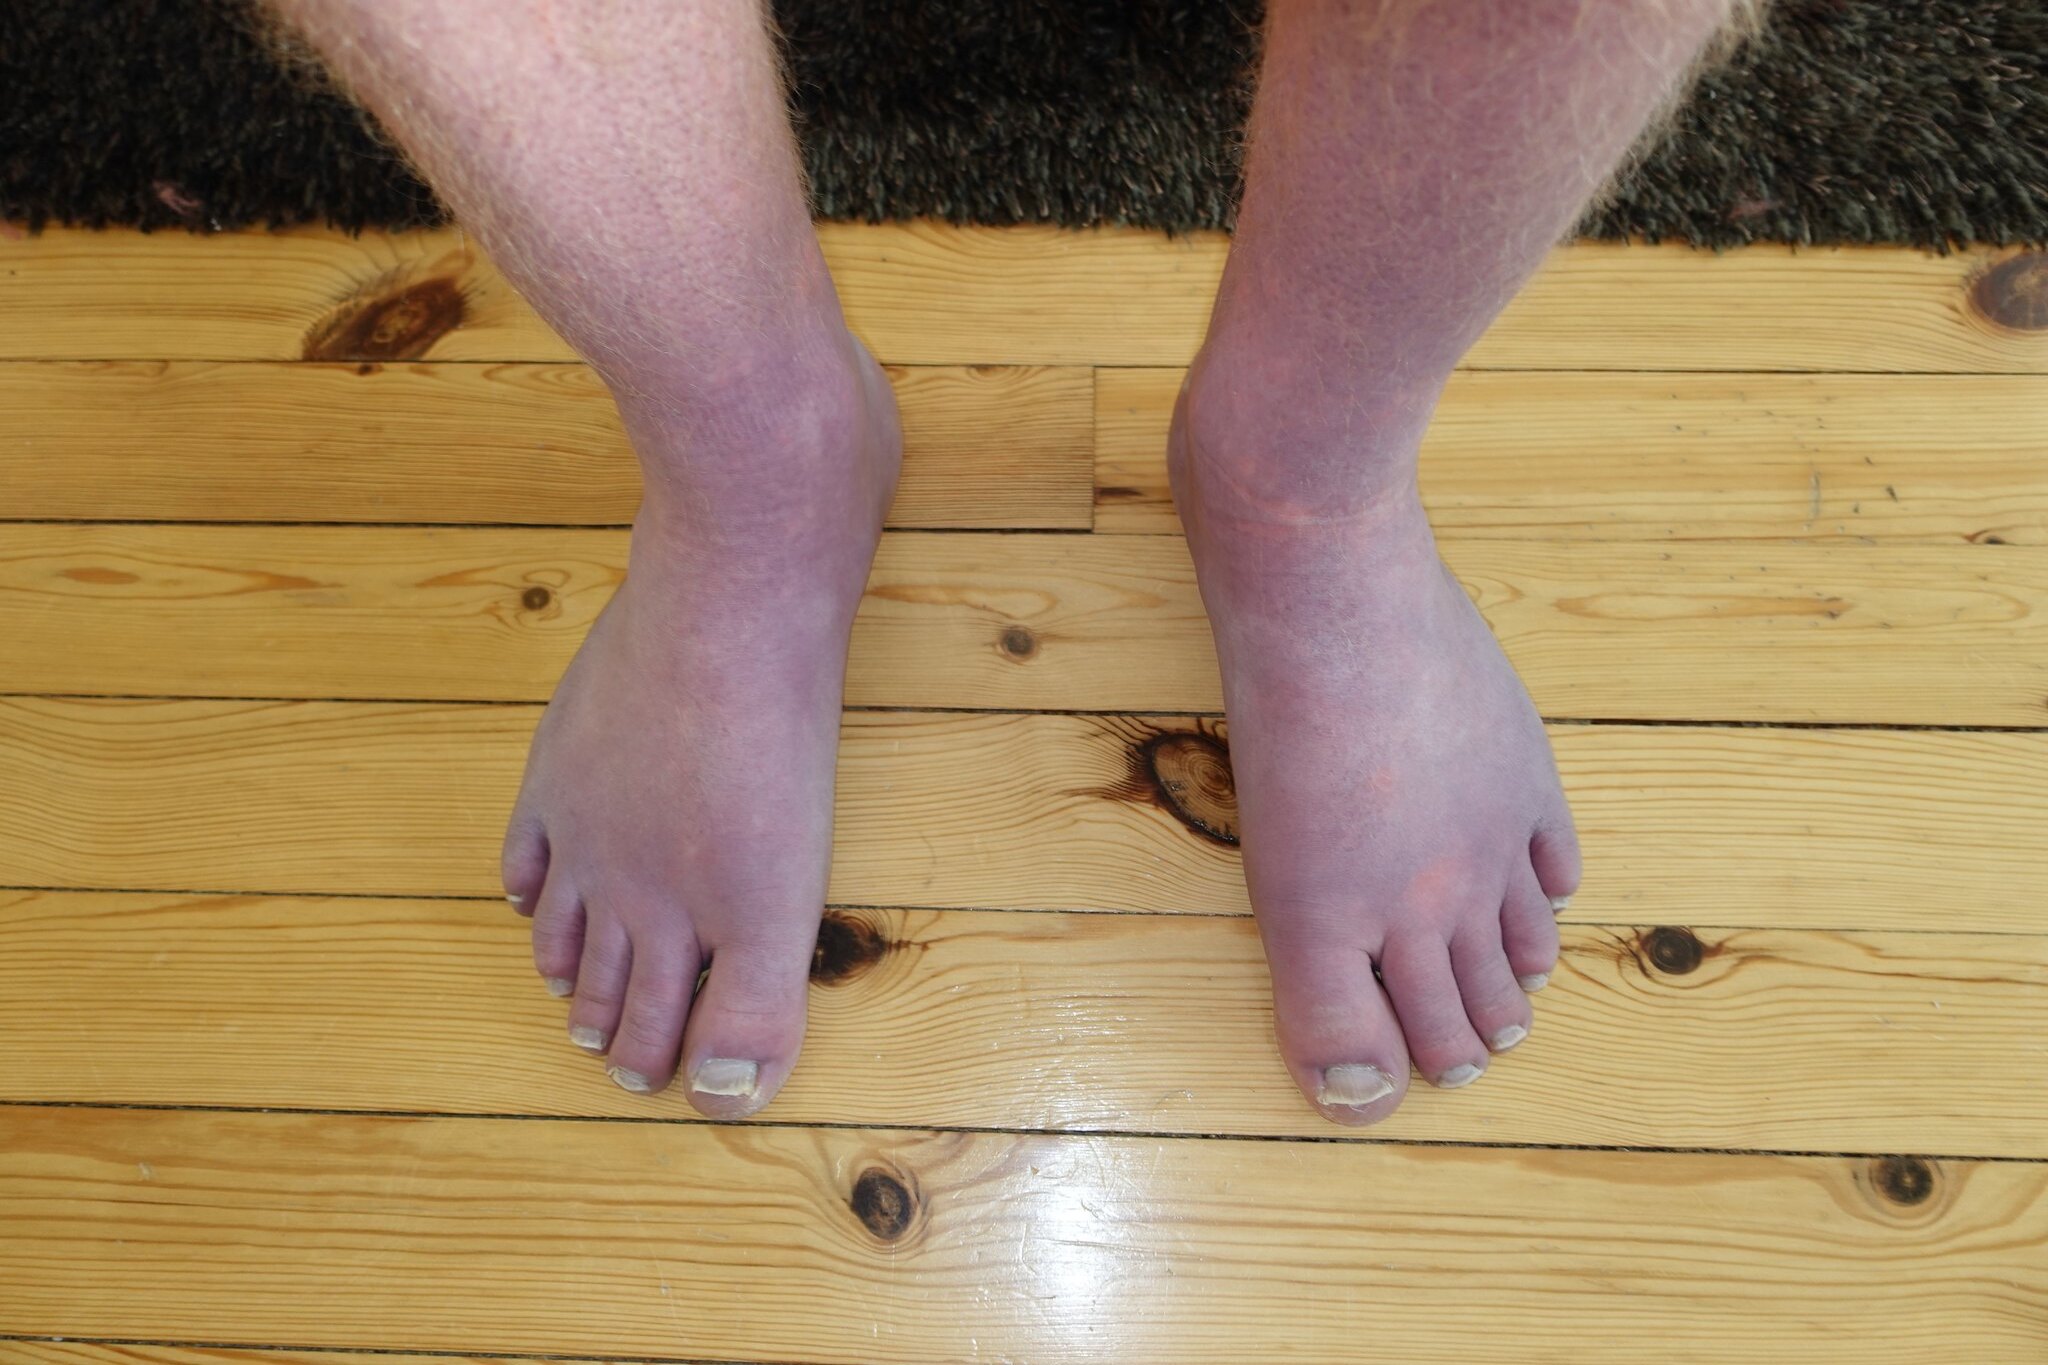 Dependent Acrocyanosis in a Norwegian 33-year old male POTS patient